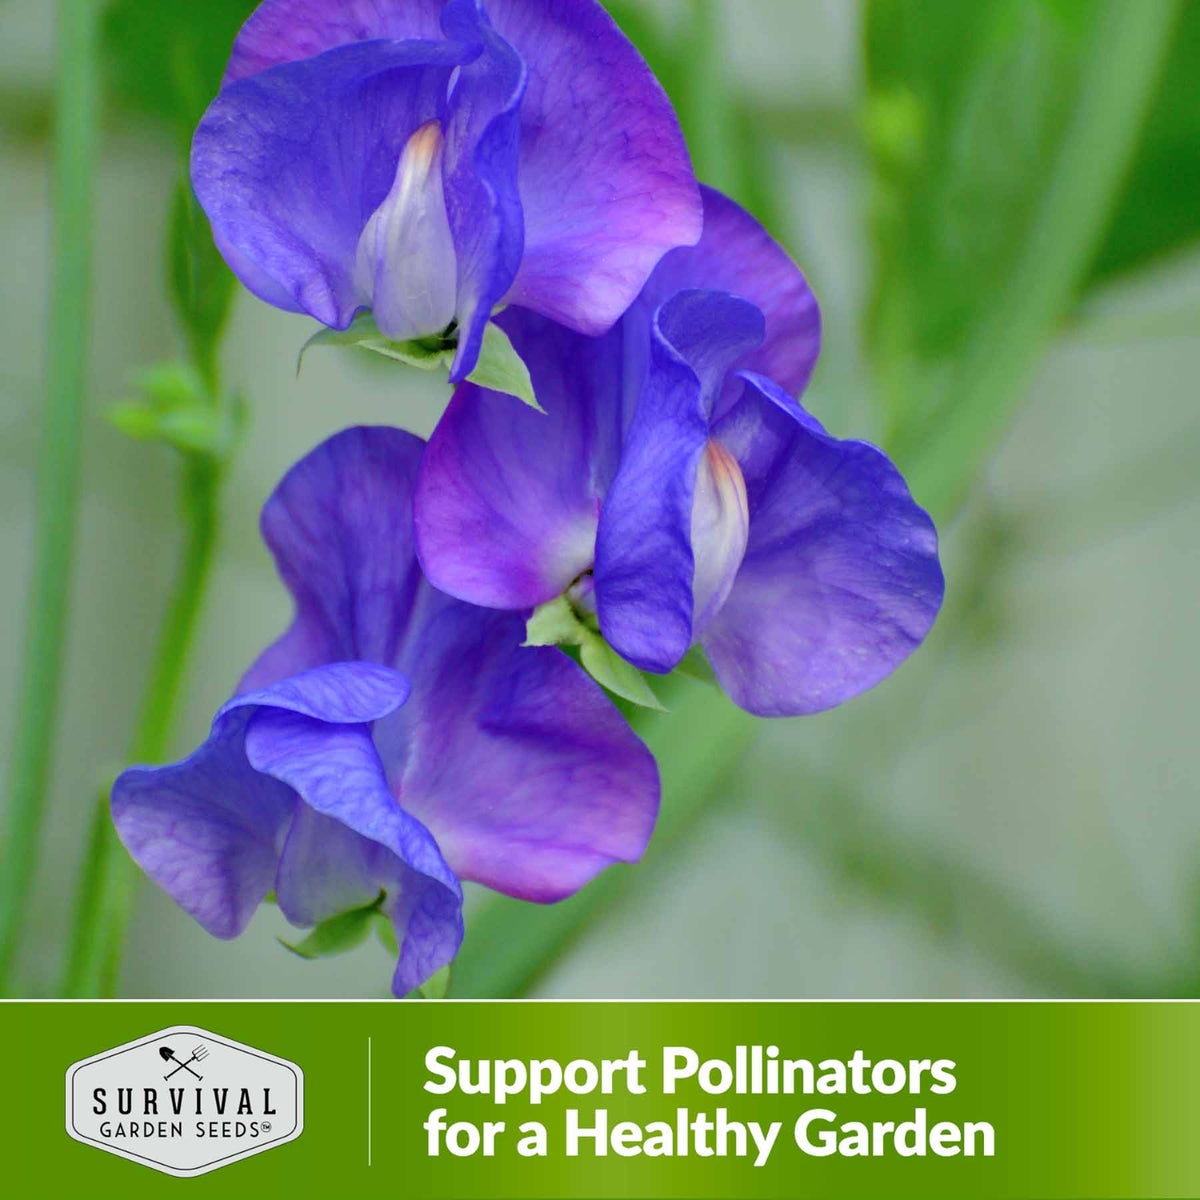 Support pollinators for a healthy garden